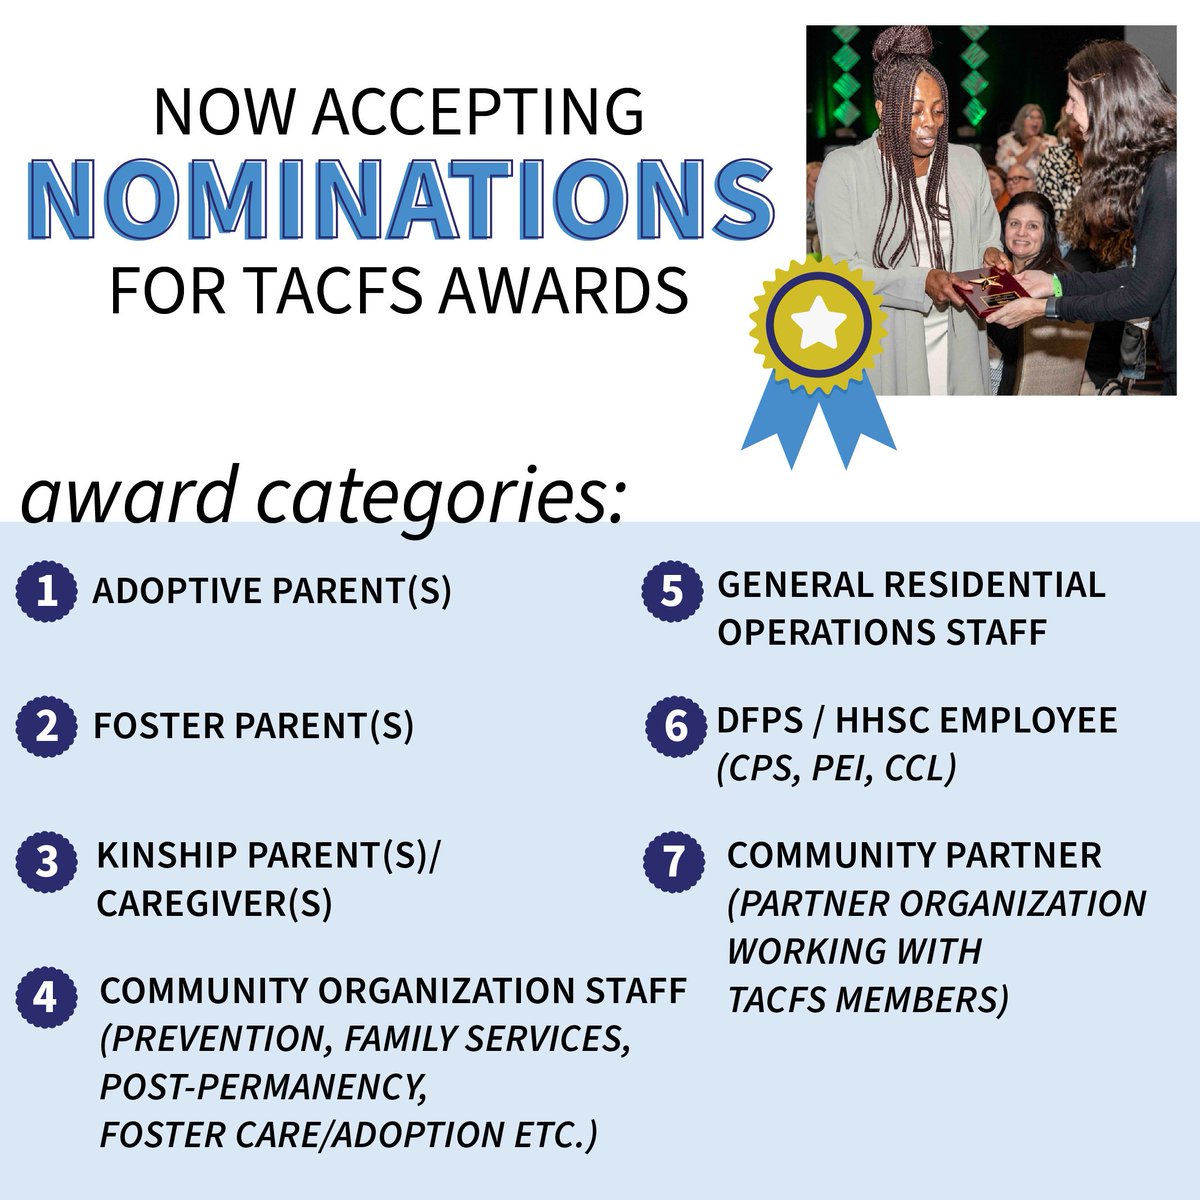 TACFS Award Nominations are NOW OPEN! TACFS member organizations are invited to submit nominations for our annual awards announced at the Texas Child Care Administrators Conference this October. Submit nominations by June 15: buff.ly/44vYo65.